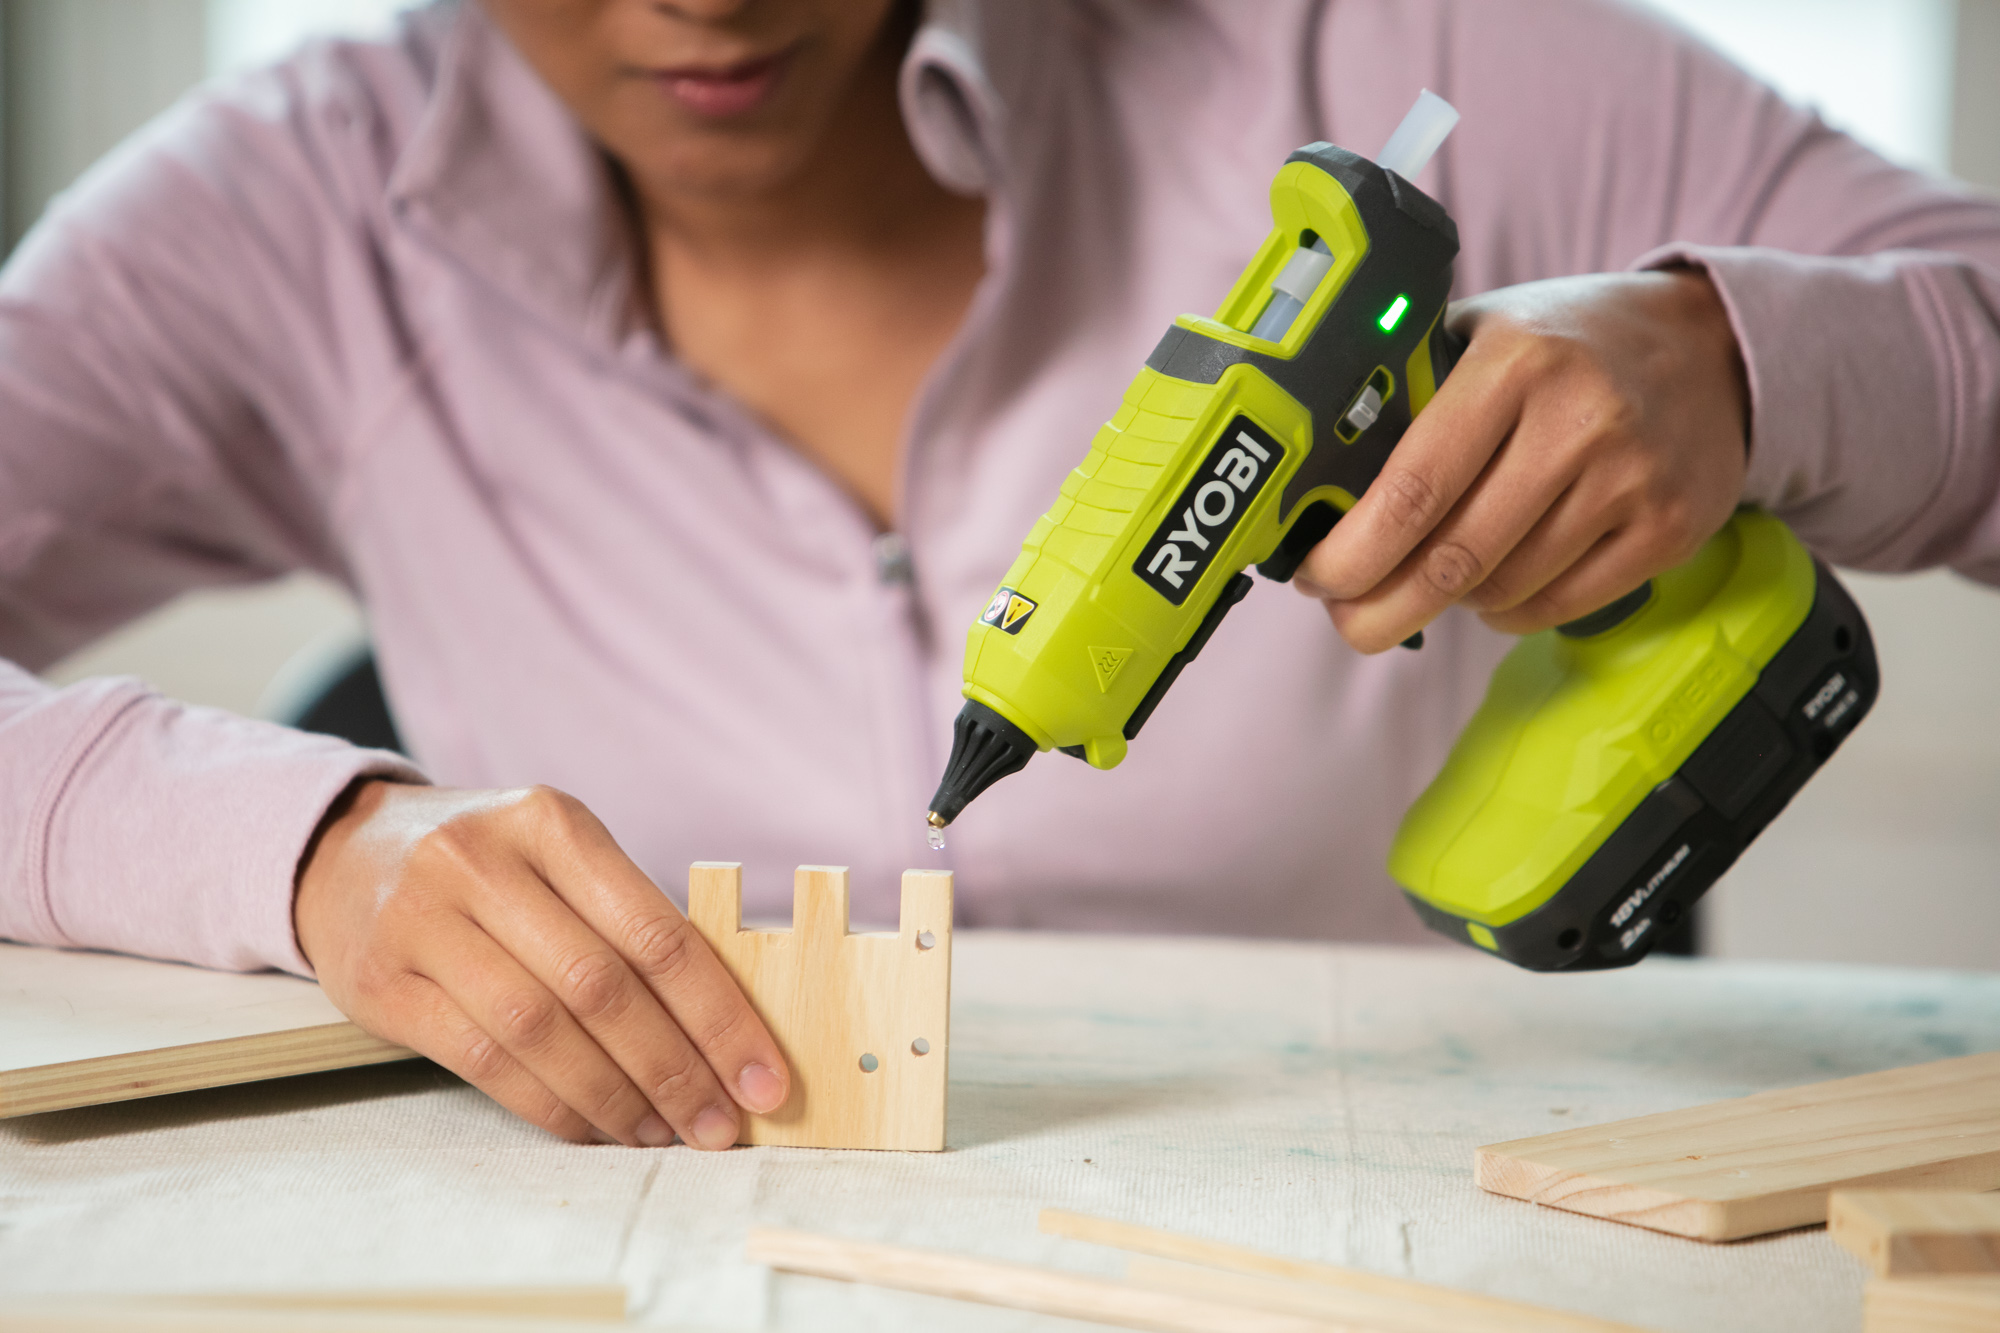 Ryobi 18V ONE+ (ONLY BODY) hot glue gun battery powered with dual  temperature 403/473K (130/200°C). Integrated LED. Compatible with 0.43  (11mm) and